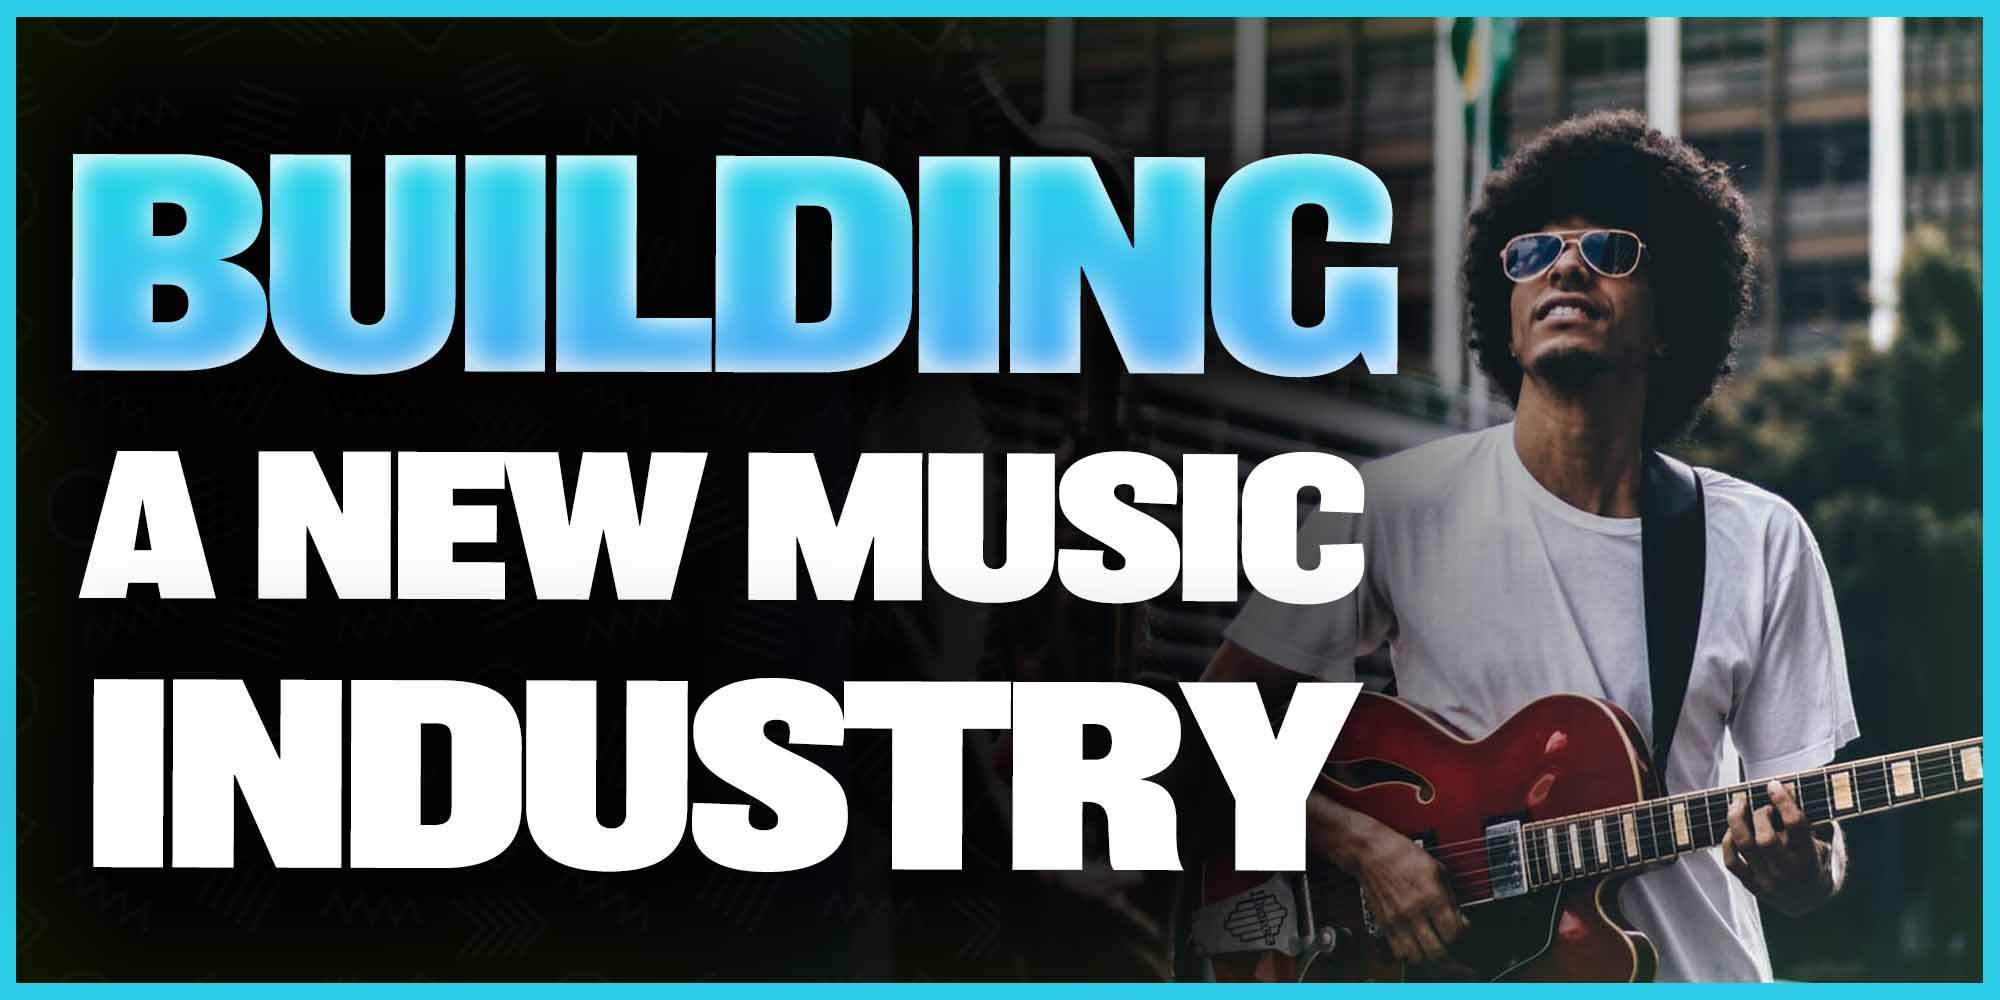 Building A New Music Industry